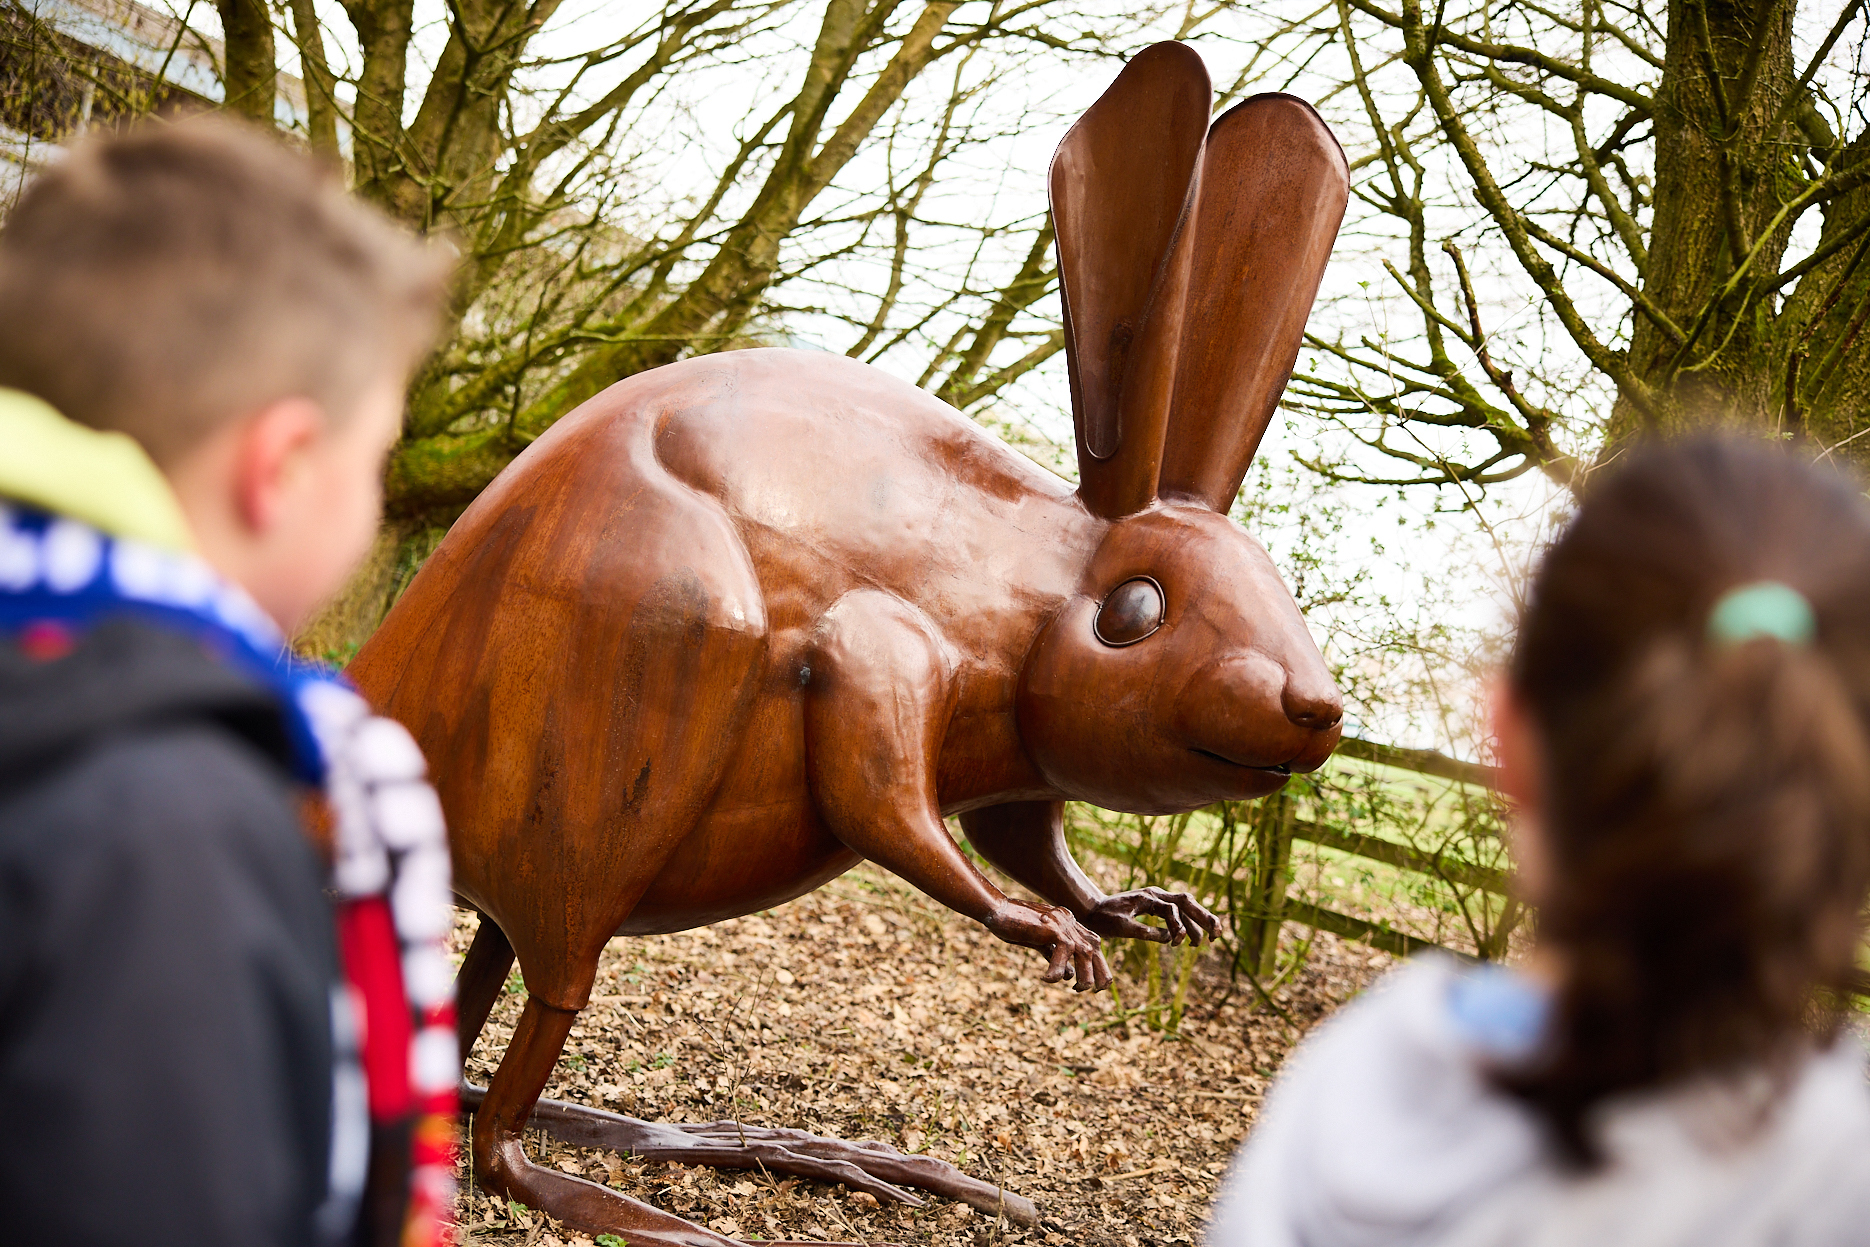 Two children looking at a bronze long-eared mouse sculpture outdoors